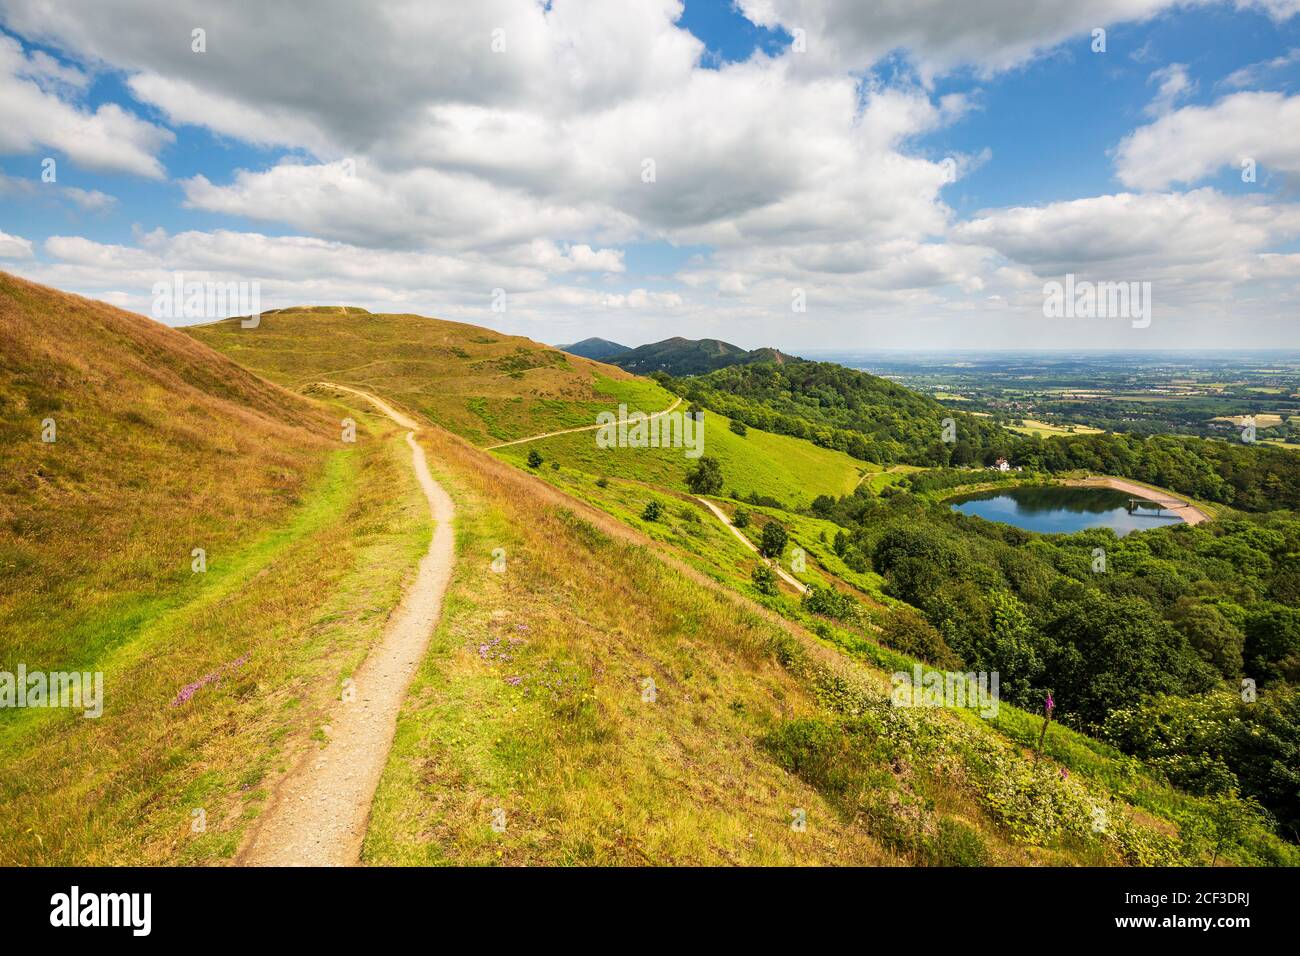 British Camp Iron Age Fort and Reservoir in the Malvern Hills, Worcestershire, England Stock Photo